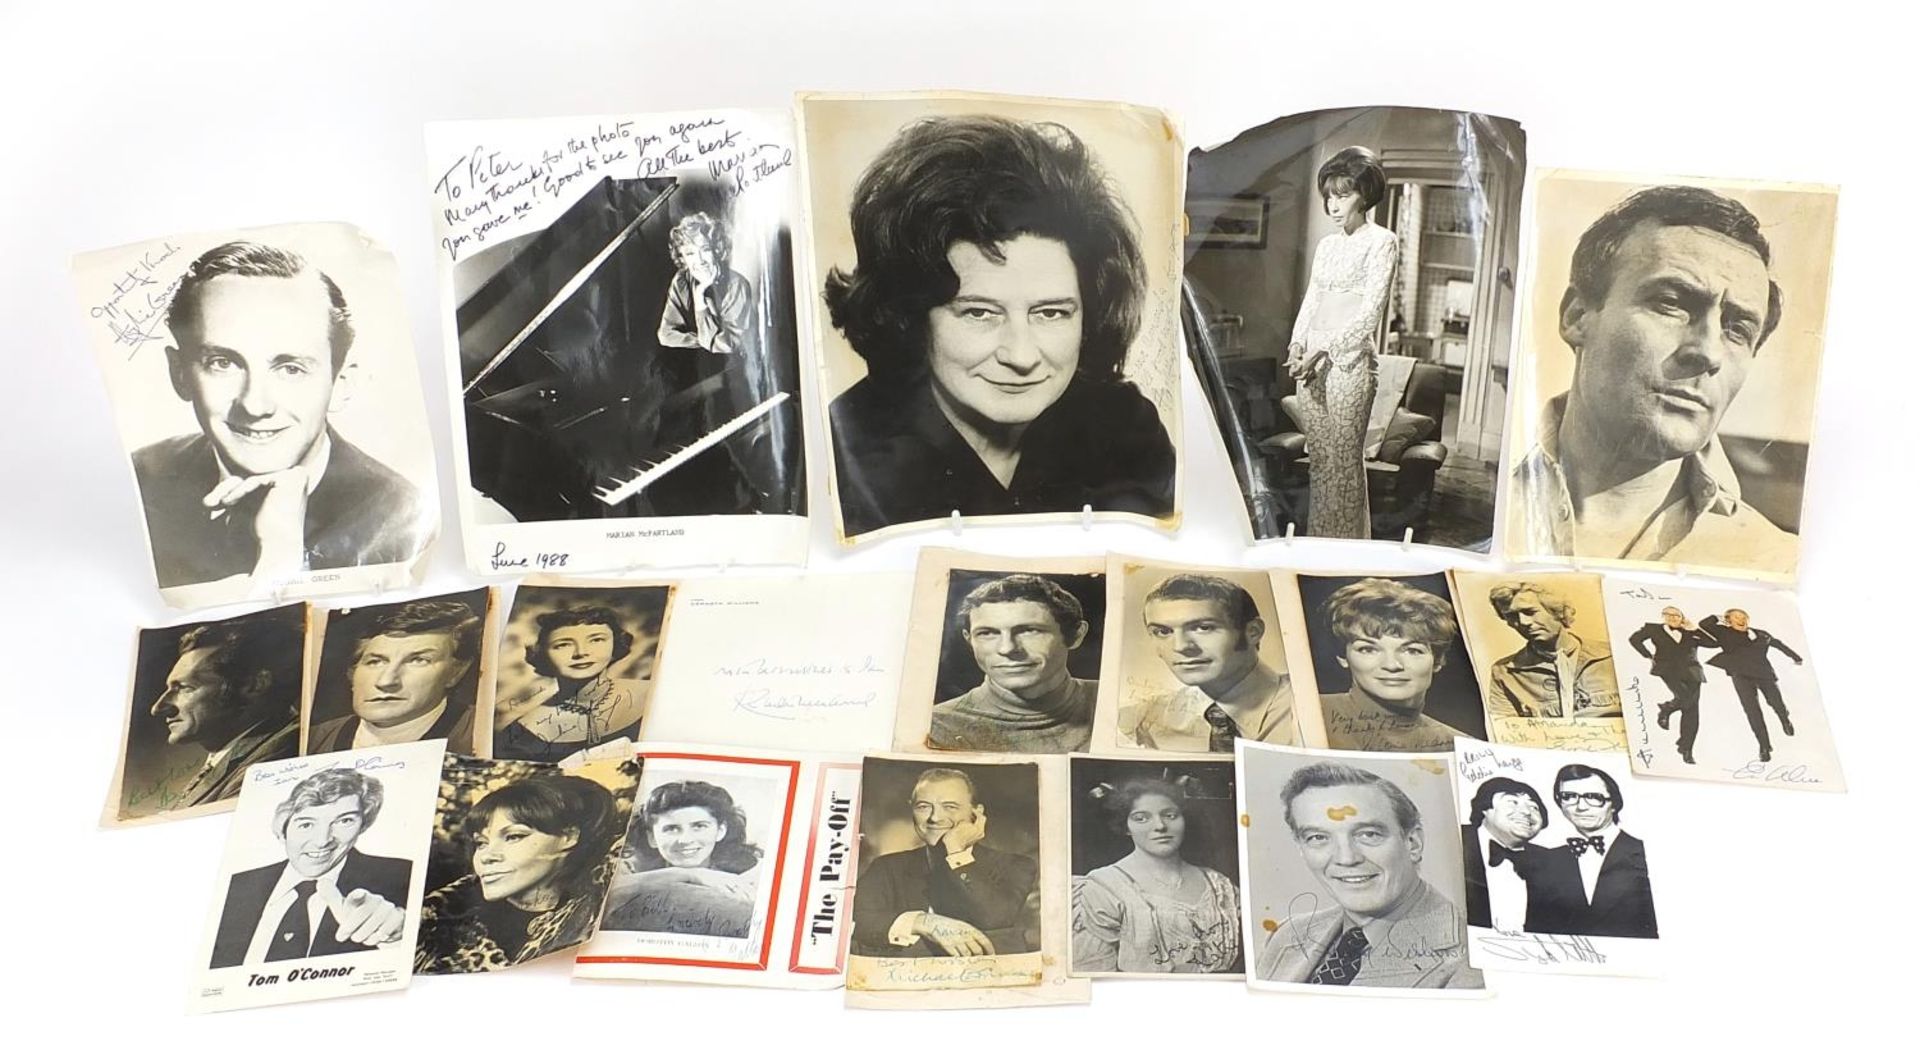 Autographs to include Little & Large, Morecombe & Wise, Hughie Green, Tom O'Connor, letter from